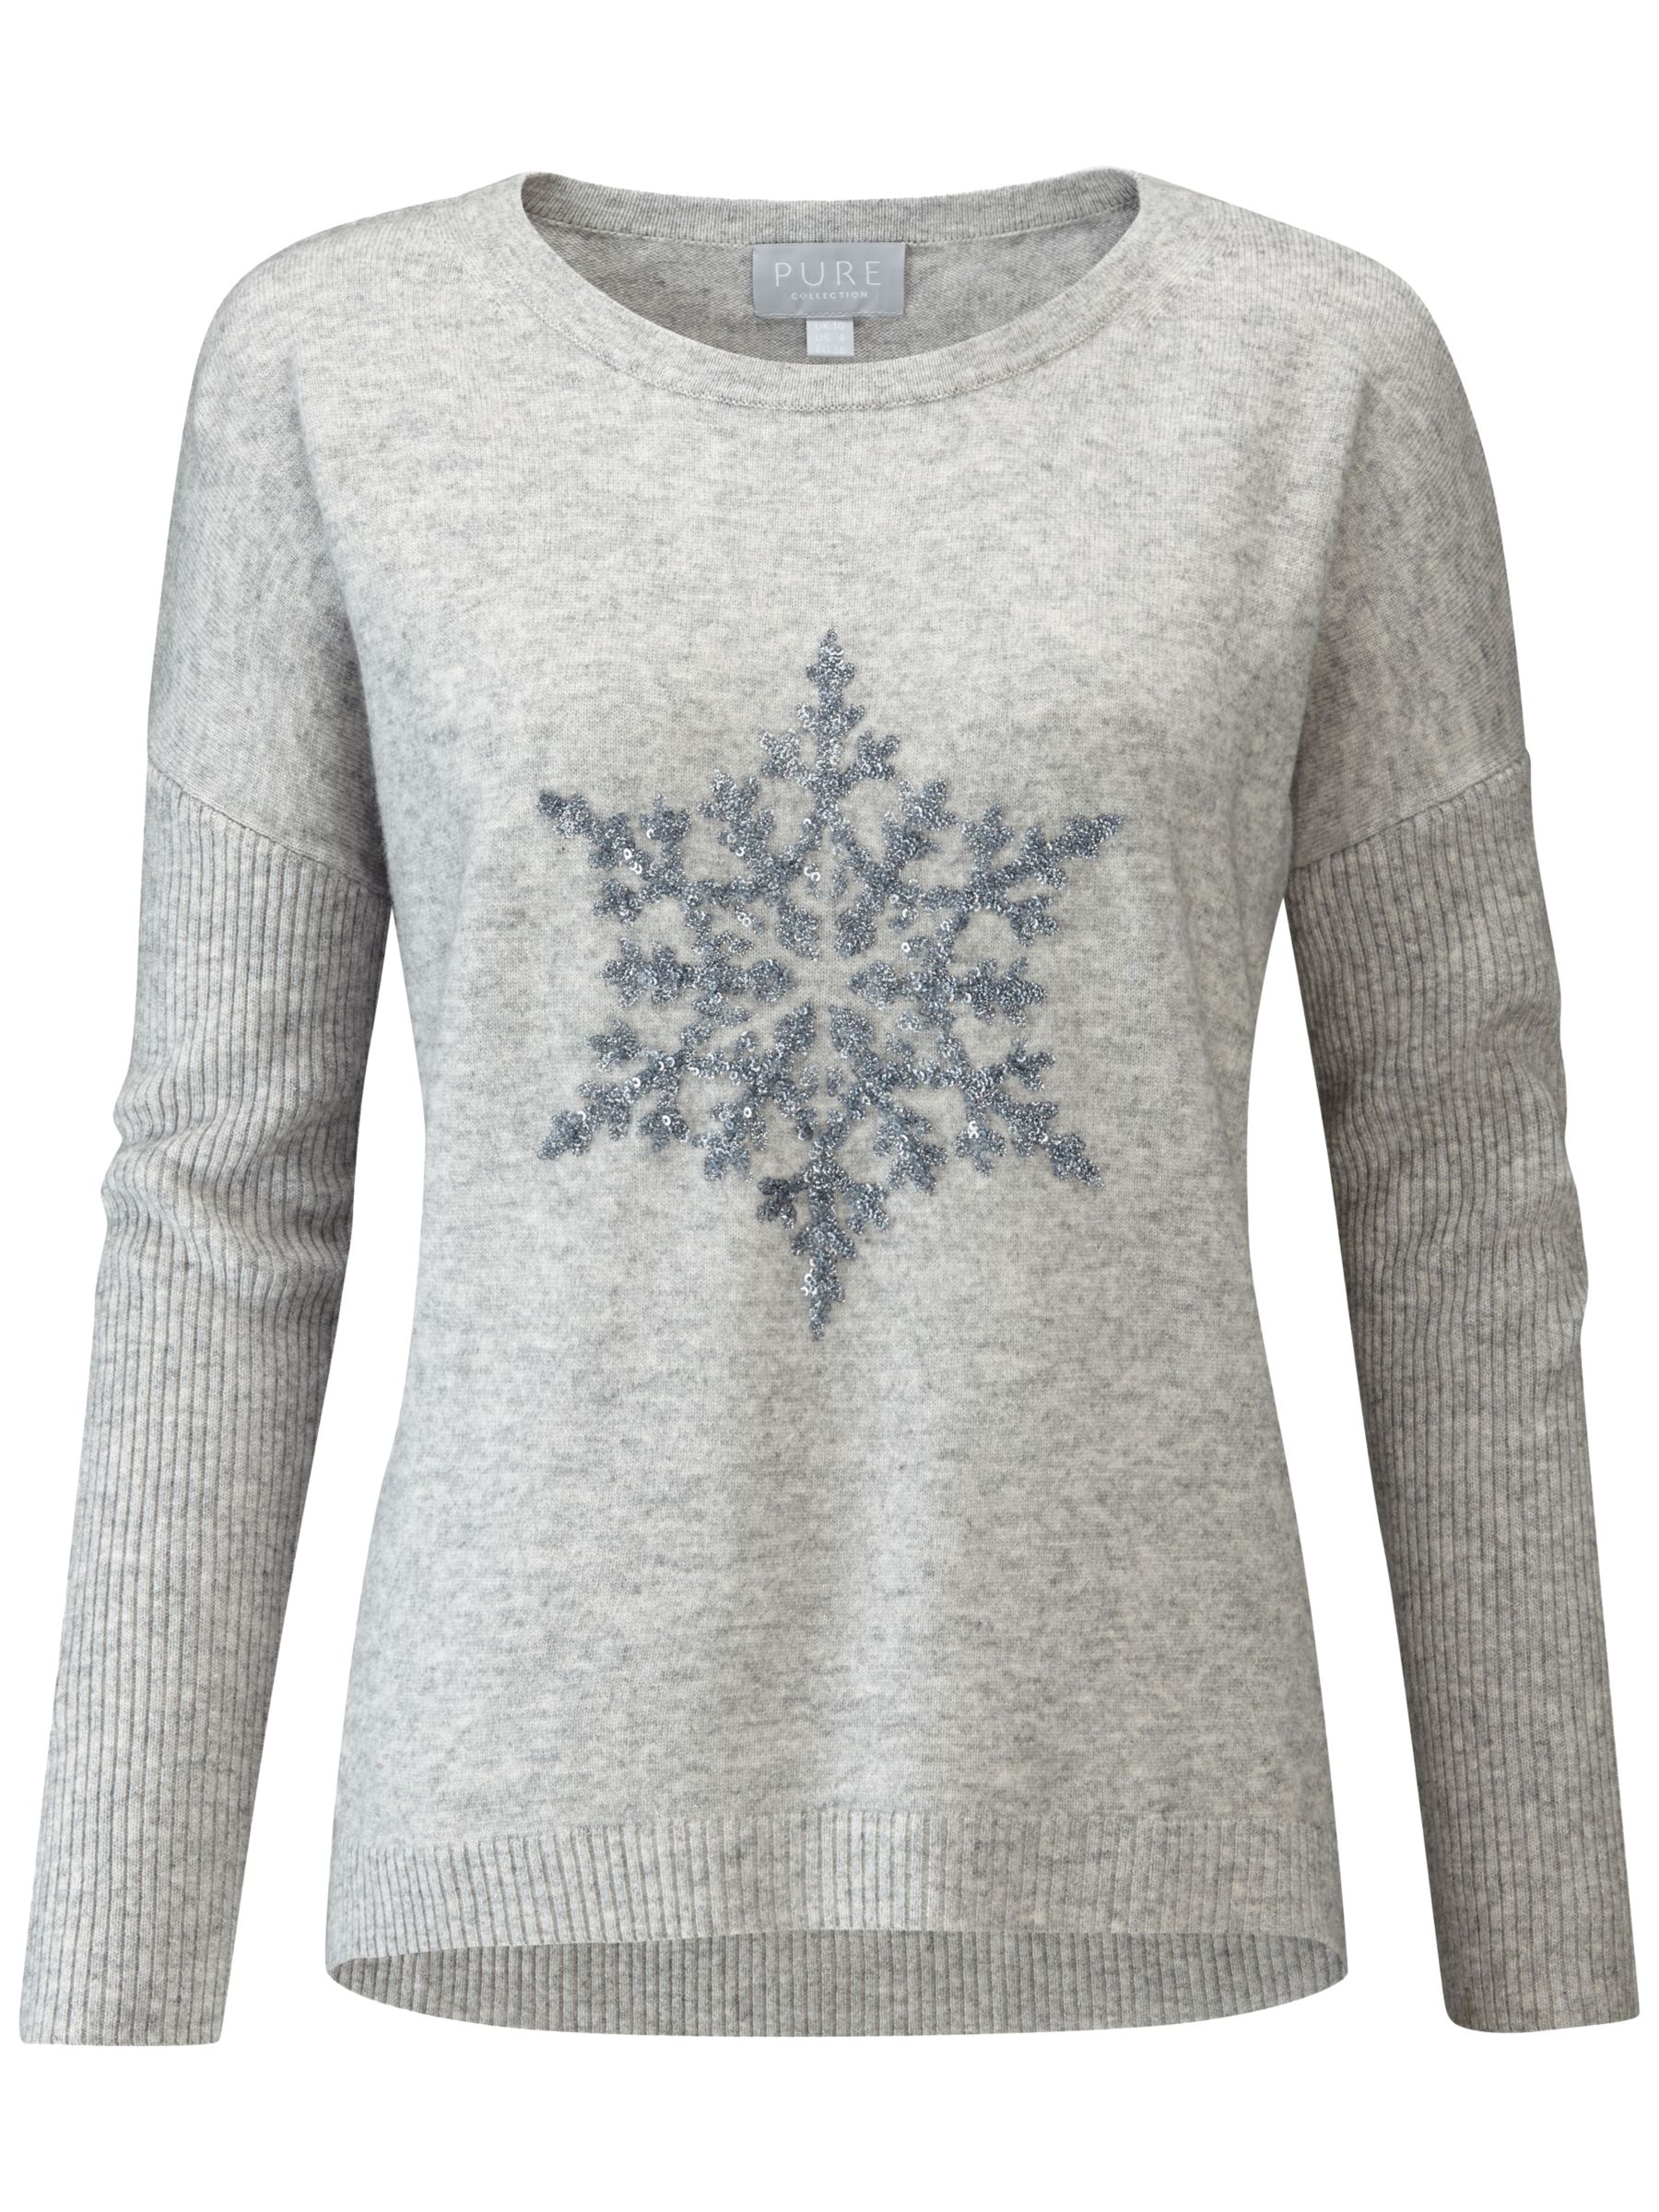 Pure Collection Sparkle Snowflake Dipped Hem Jumper, Grey, 16